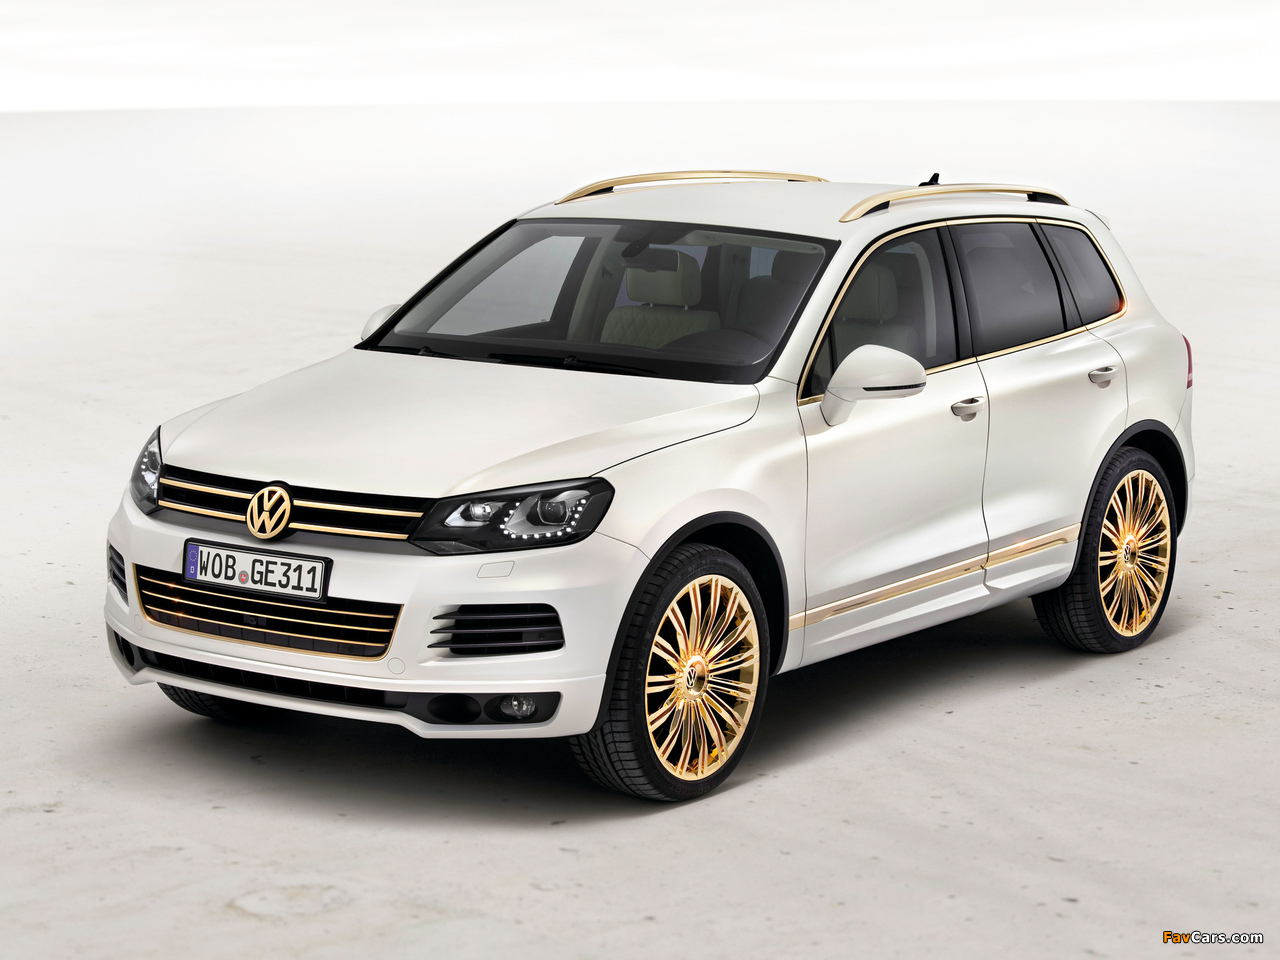 Volkswagen Touareg V8 TDI Gold Edition Concept 2011 wallpapers (1280 x 960)